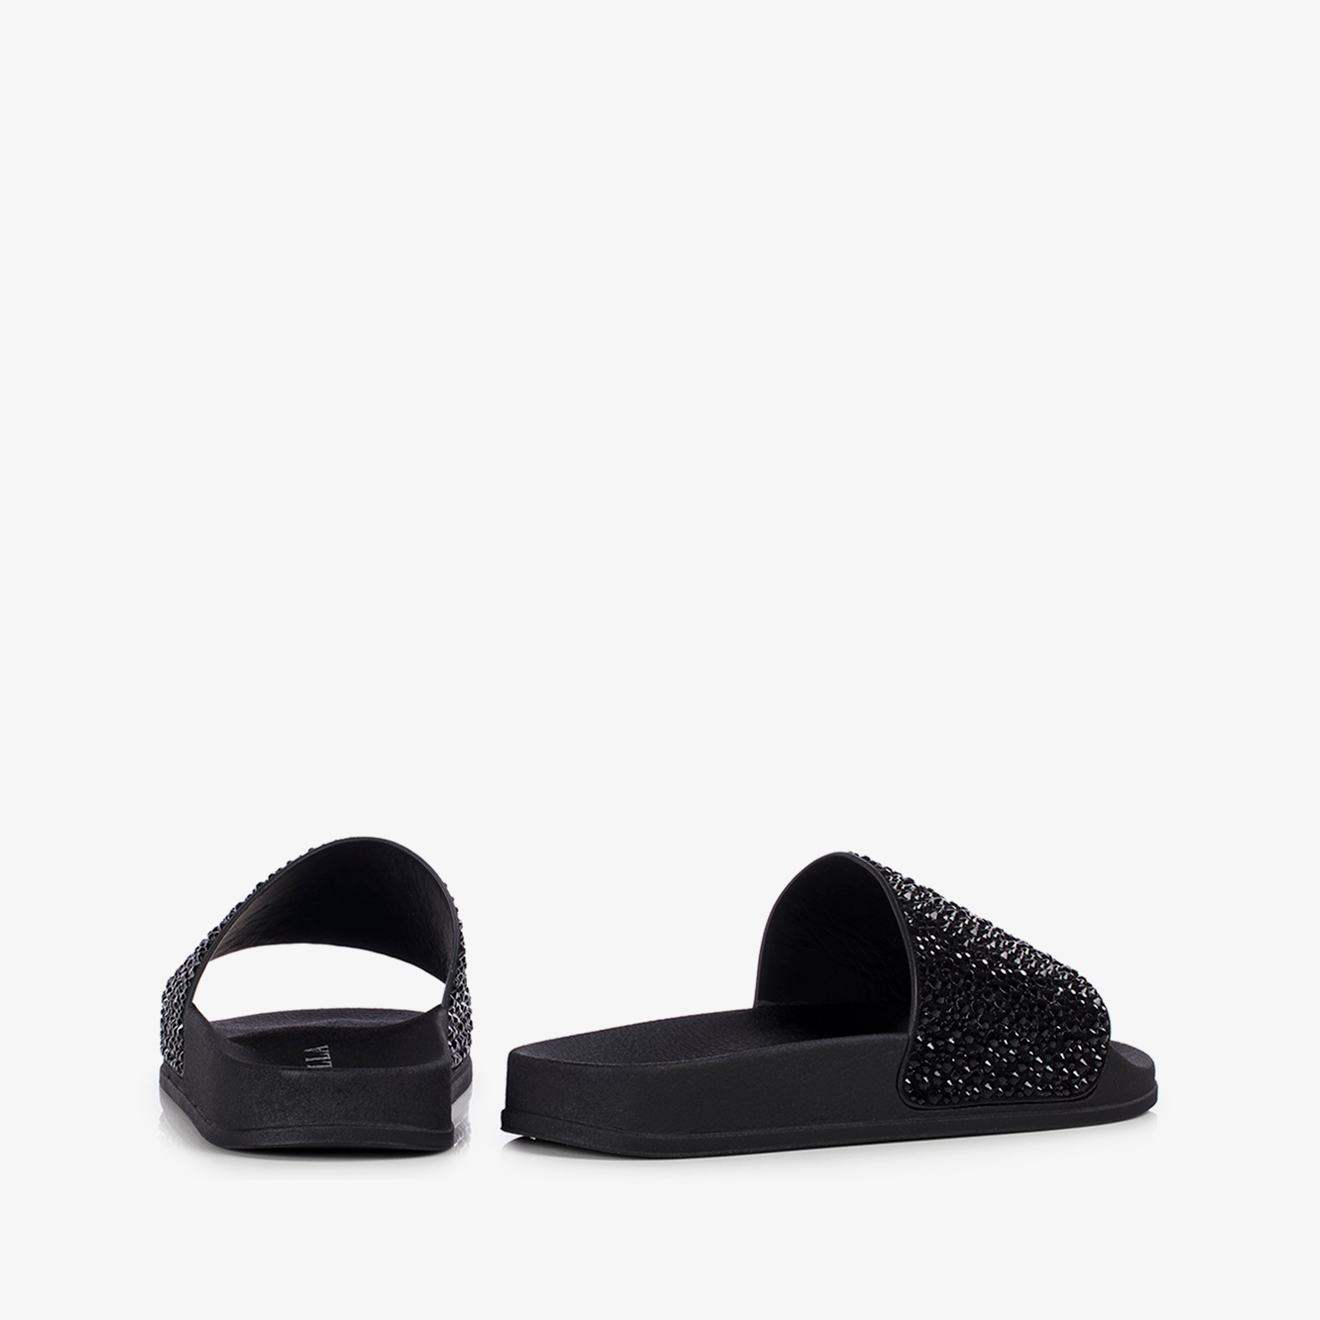 PRINCE SLIPPER - Le Silla official outlet